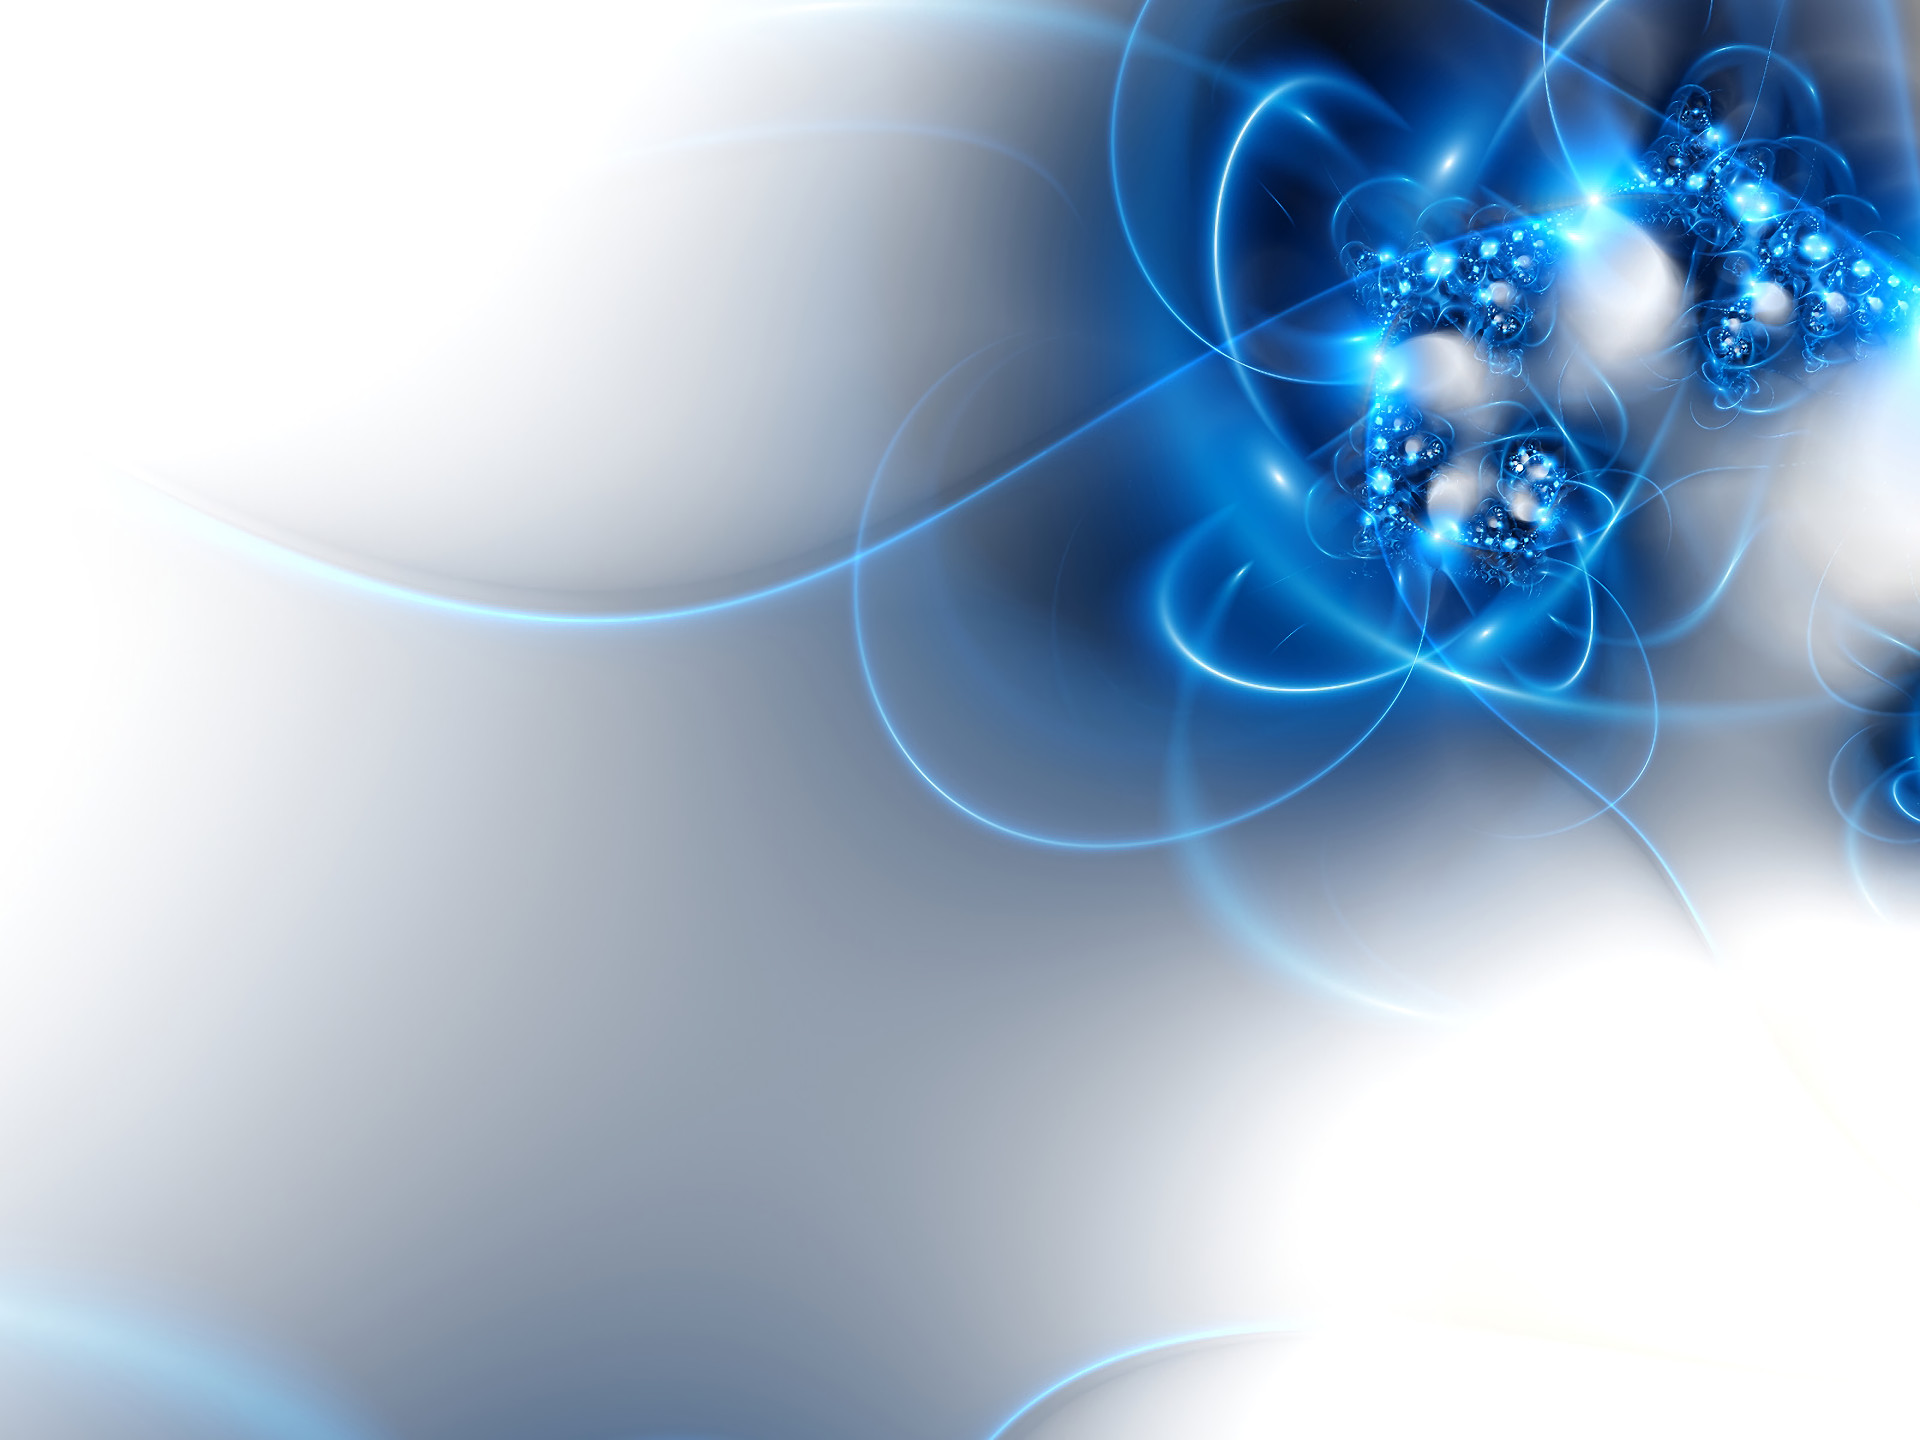 Abstract Blue Bokeh HD Wallpaper Background ID16981